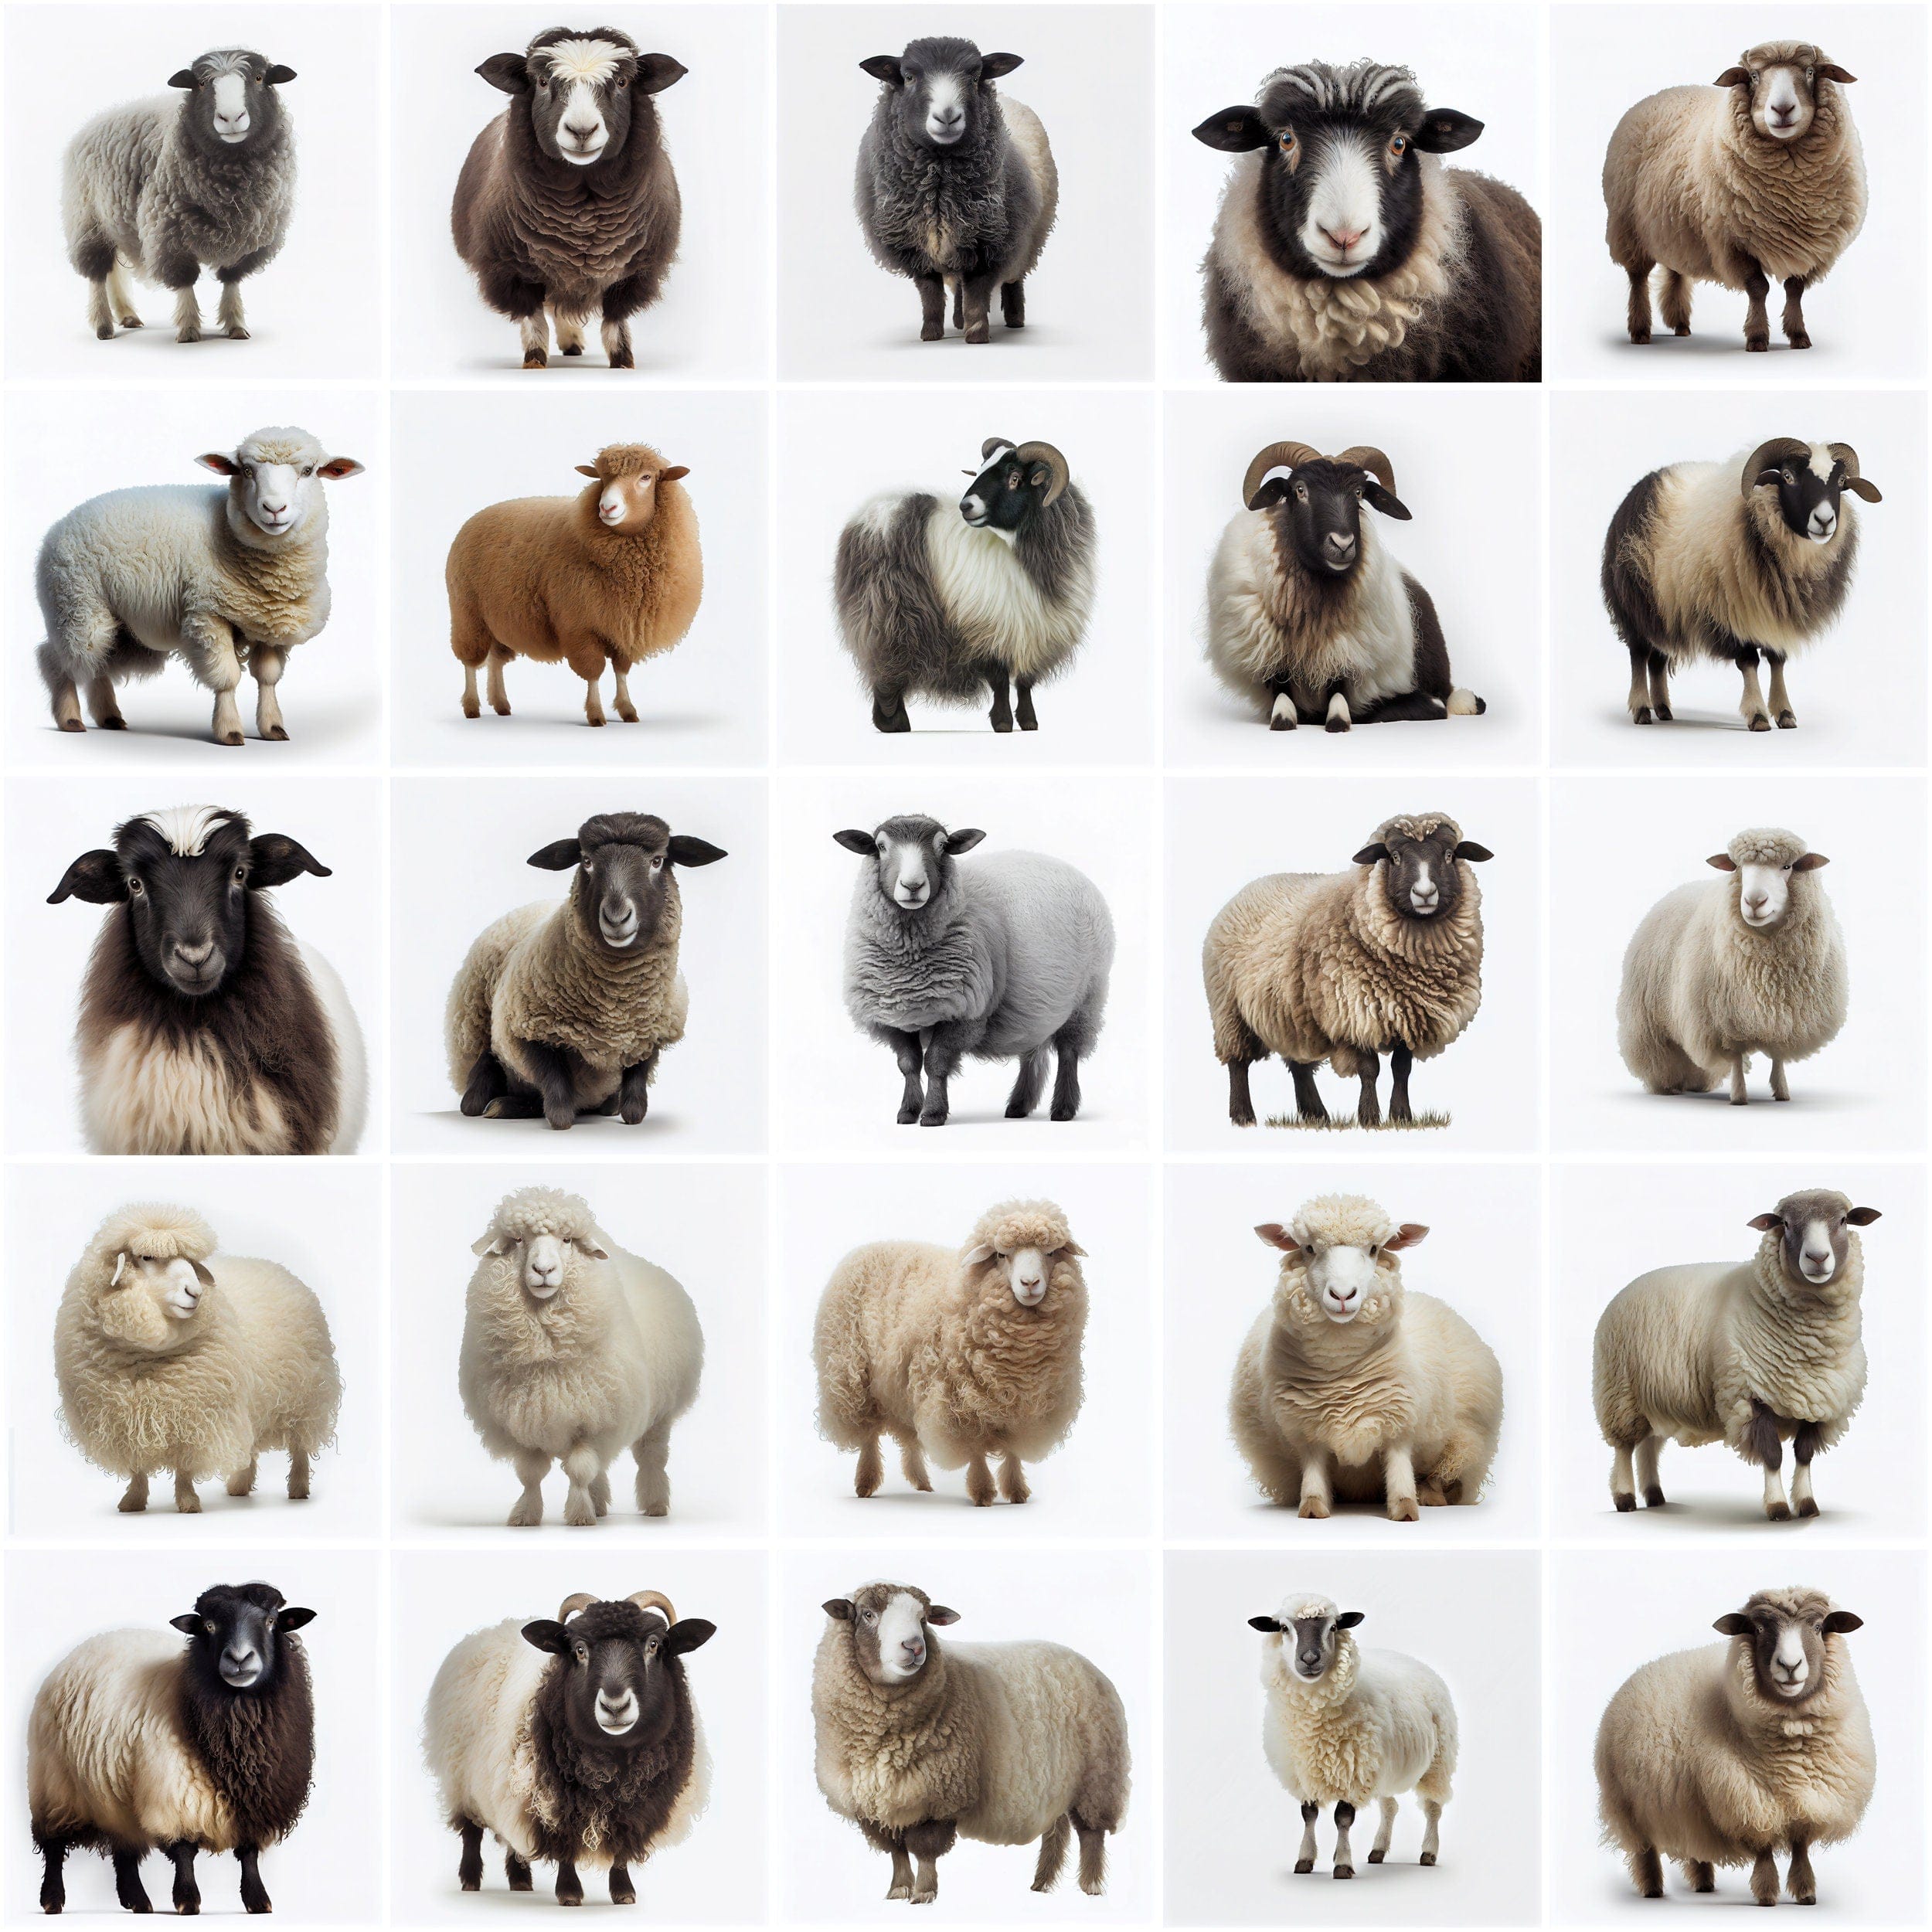 180 Cute Images with Sheep Breeds, Sheep breeds clipart. Sheep Breeds of the World: A Stunning Collection of Images for Farmers Digital Download Sumobundle